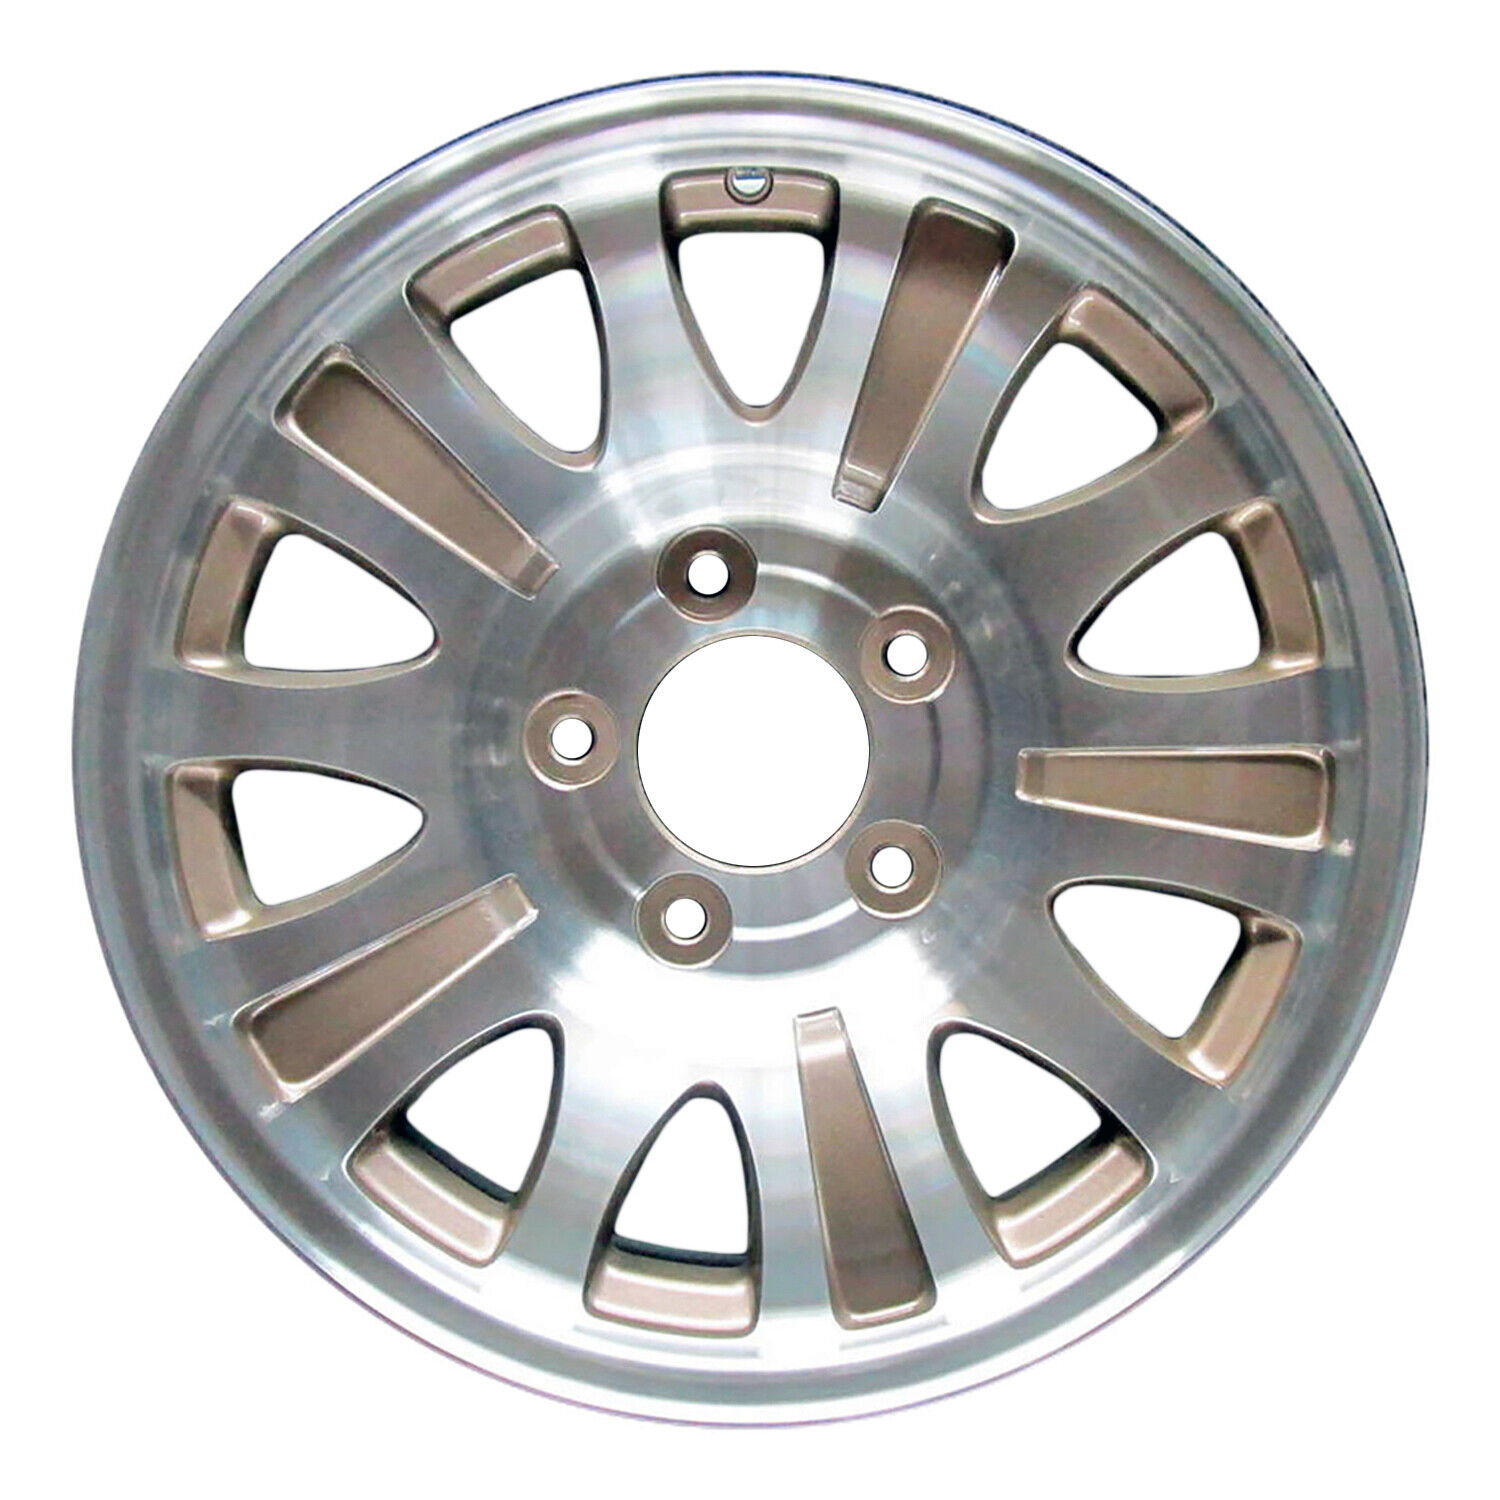 03412 Reconditioned OEM Aluminum Wheel 17x7.5 fits 2000-2002 Ford Expedition